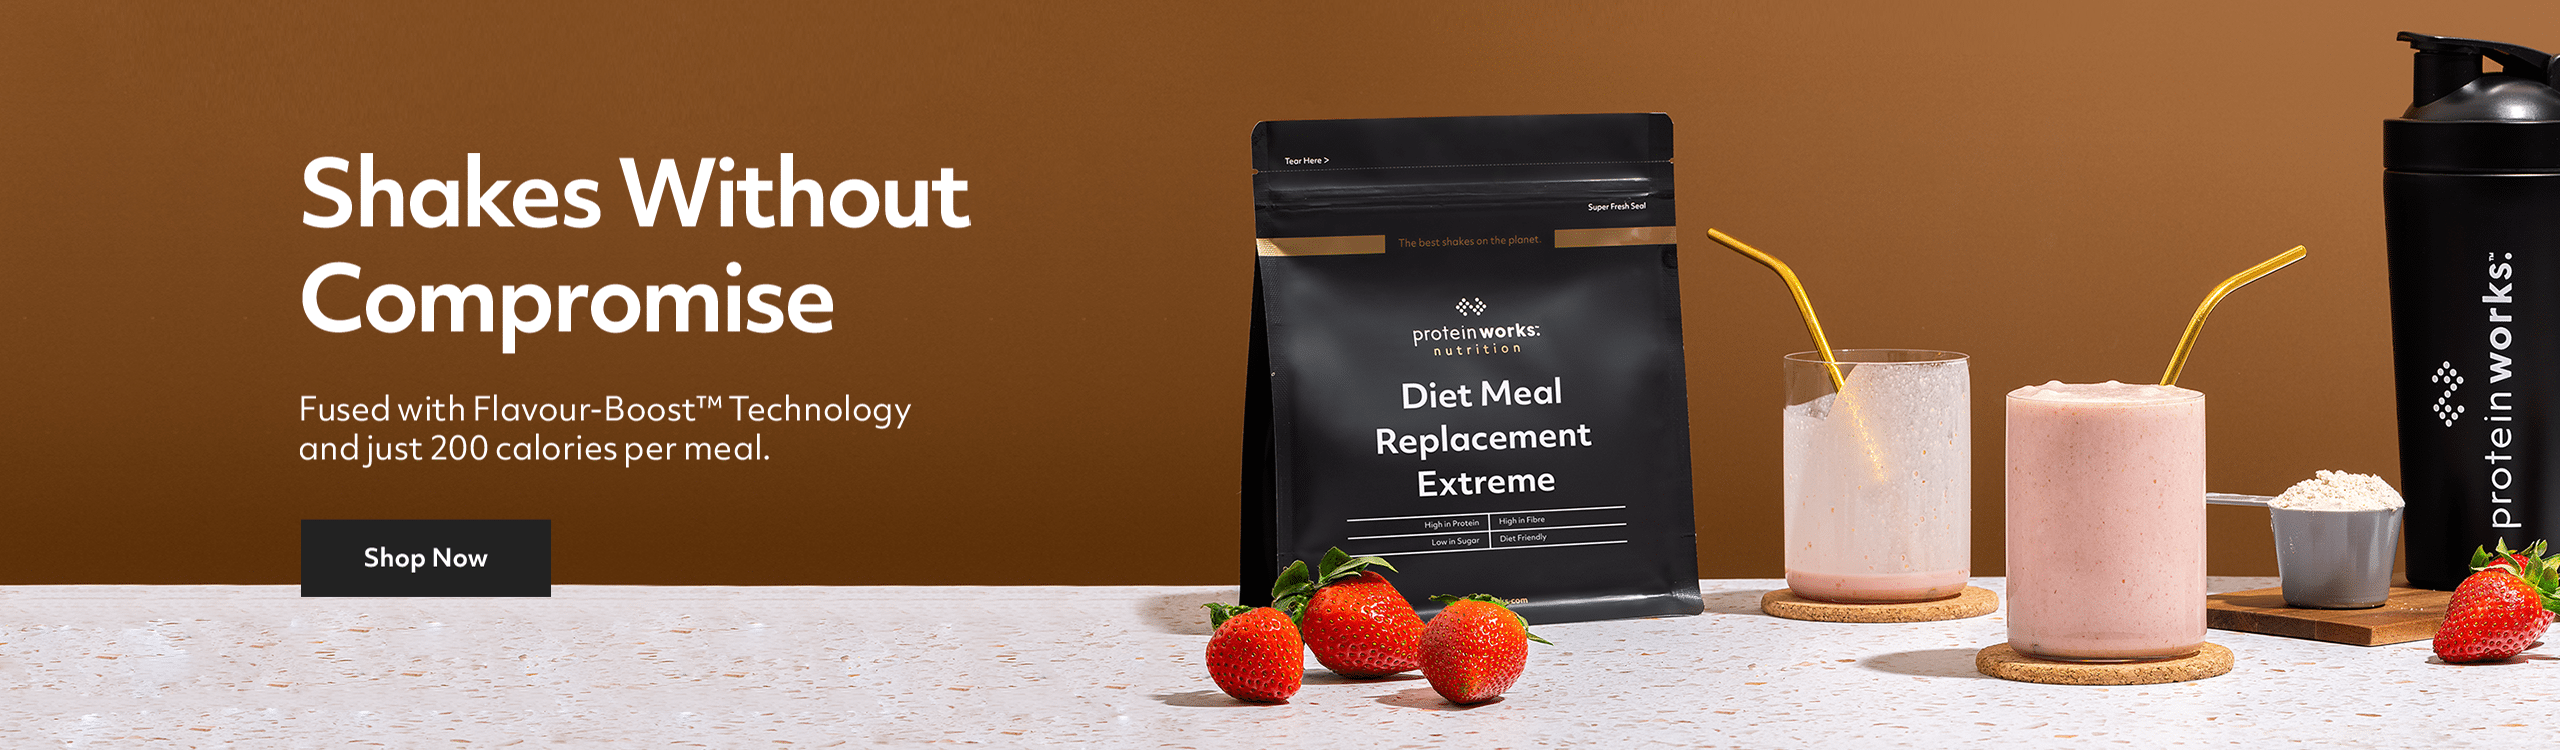 /diet-meal-replacement-extreme